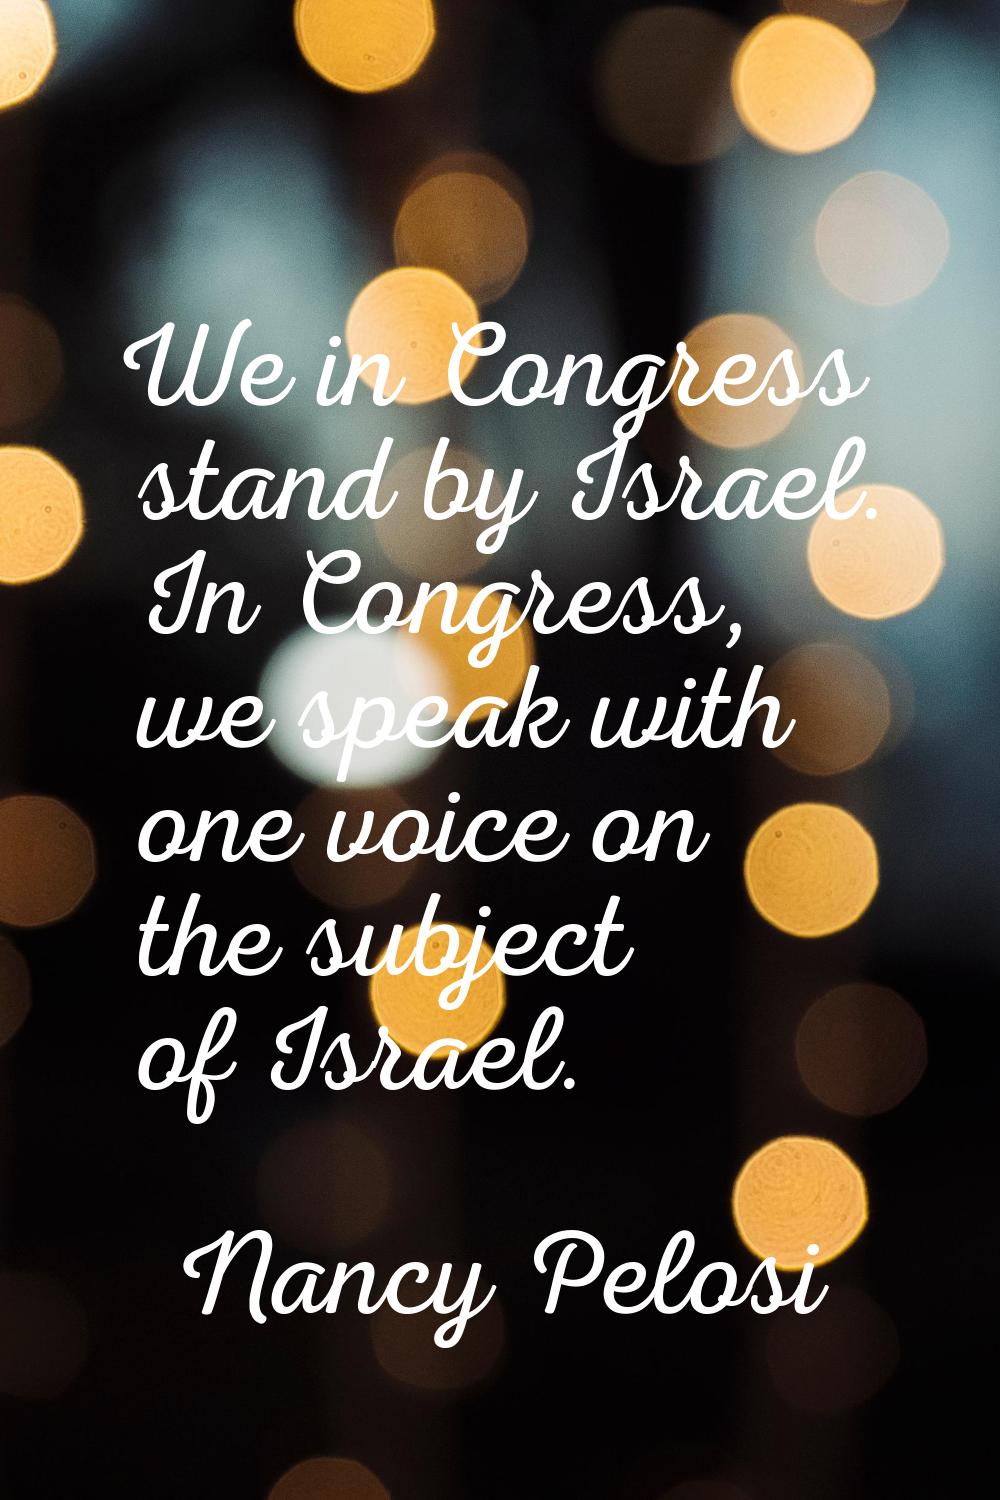 We in Congress stand by Israel. In Congress, we speak with one voice on the subject of Israel.